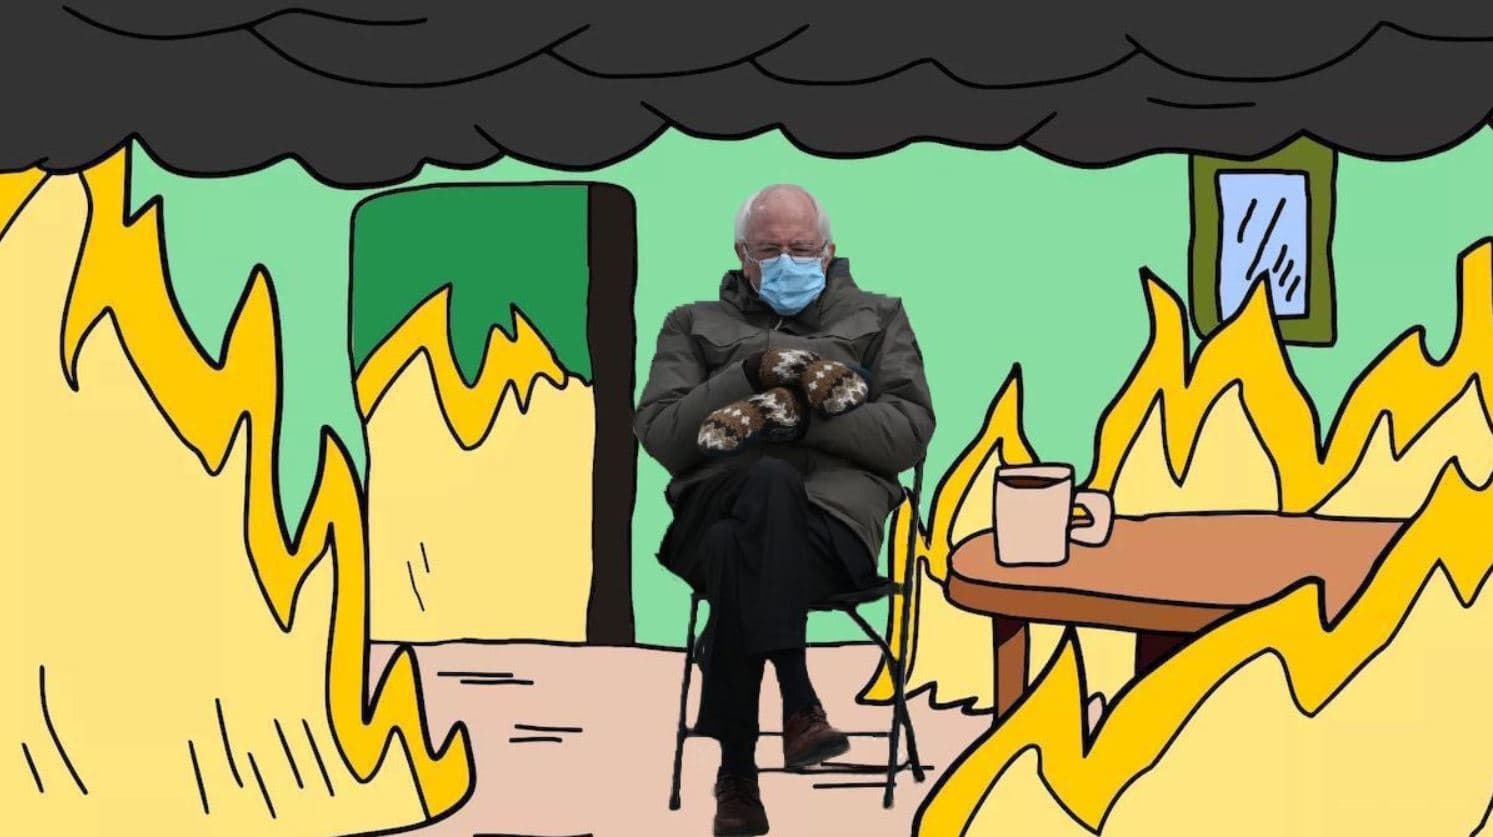 Bernie Sitting Memes - Surrounded by fire